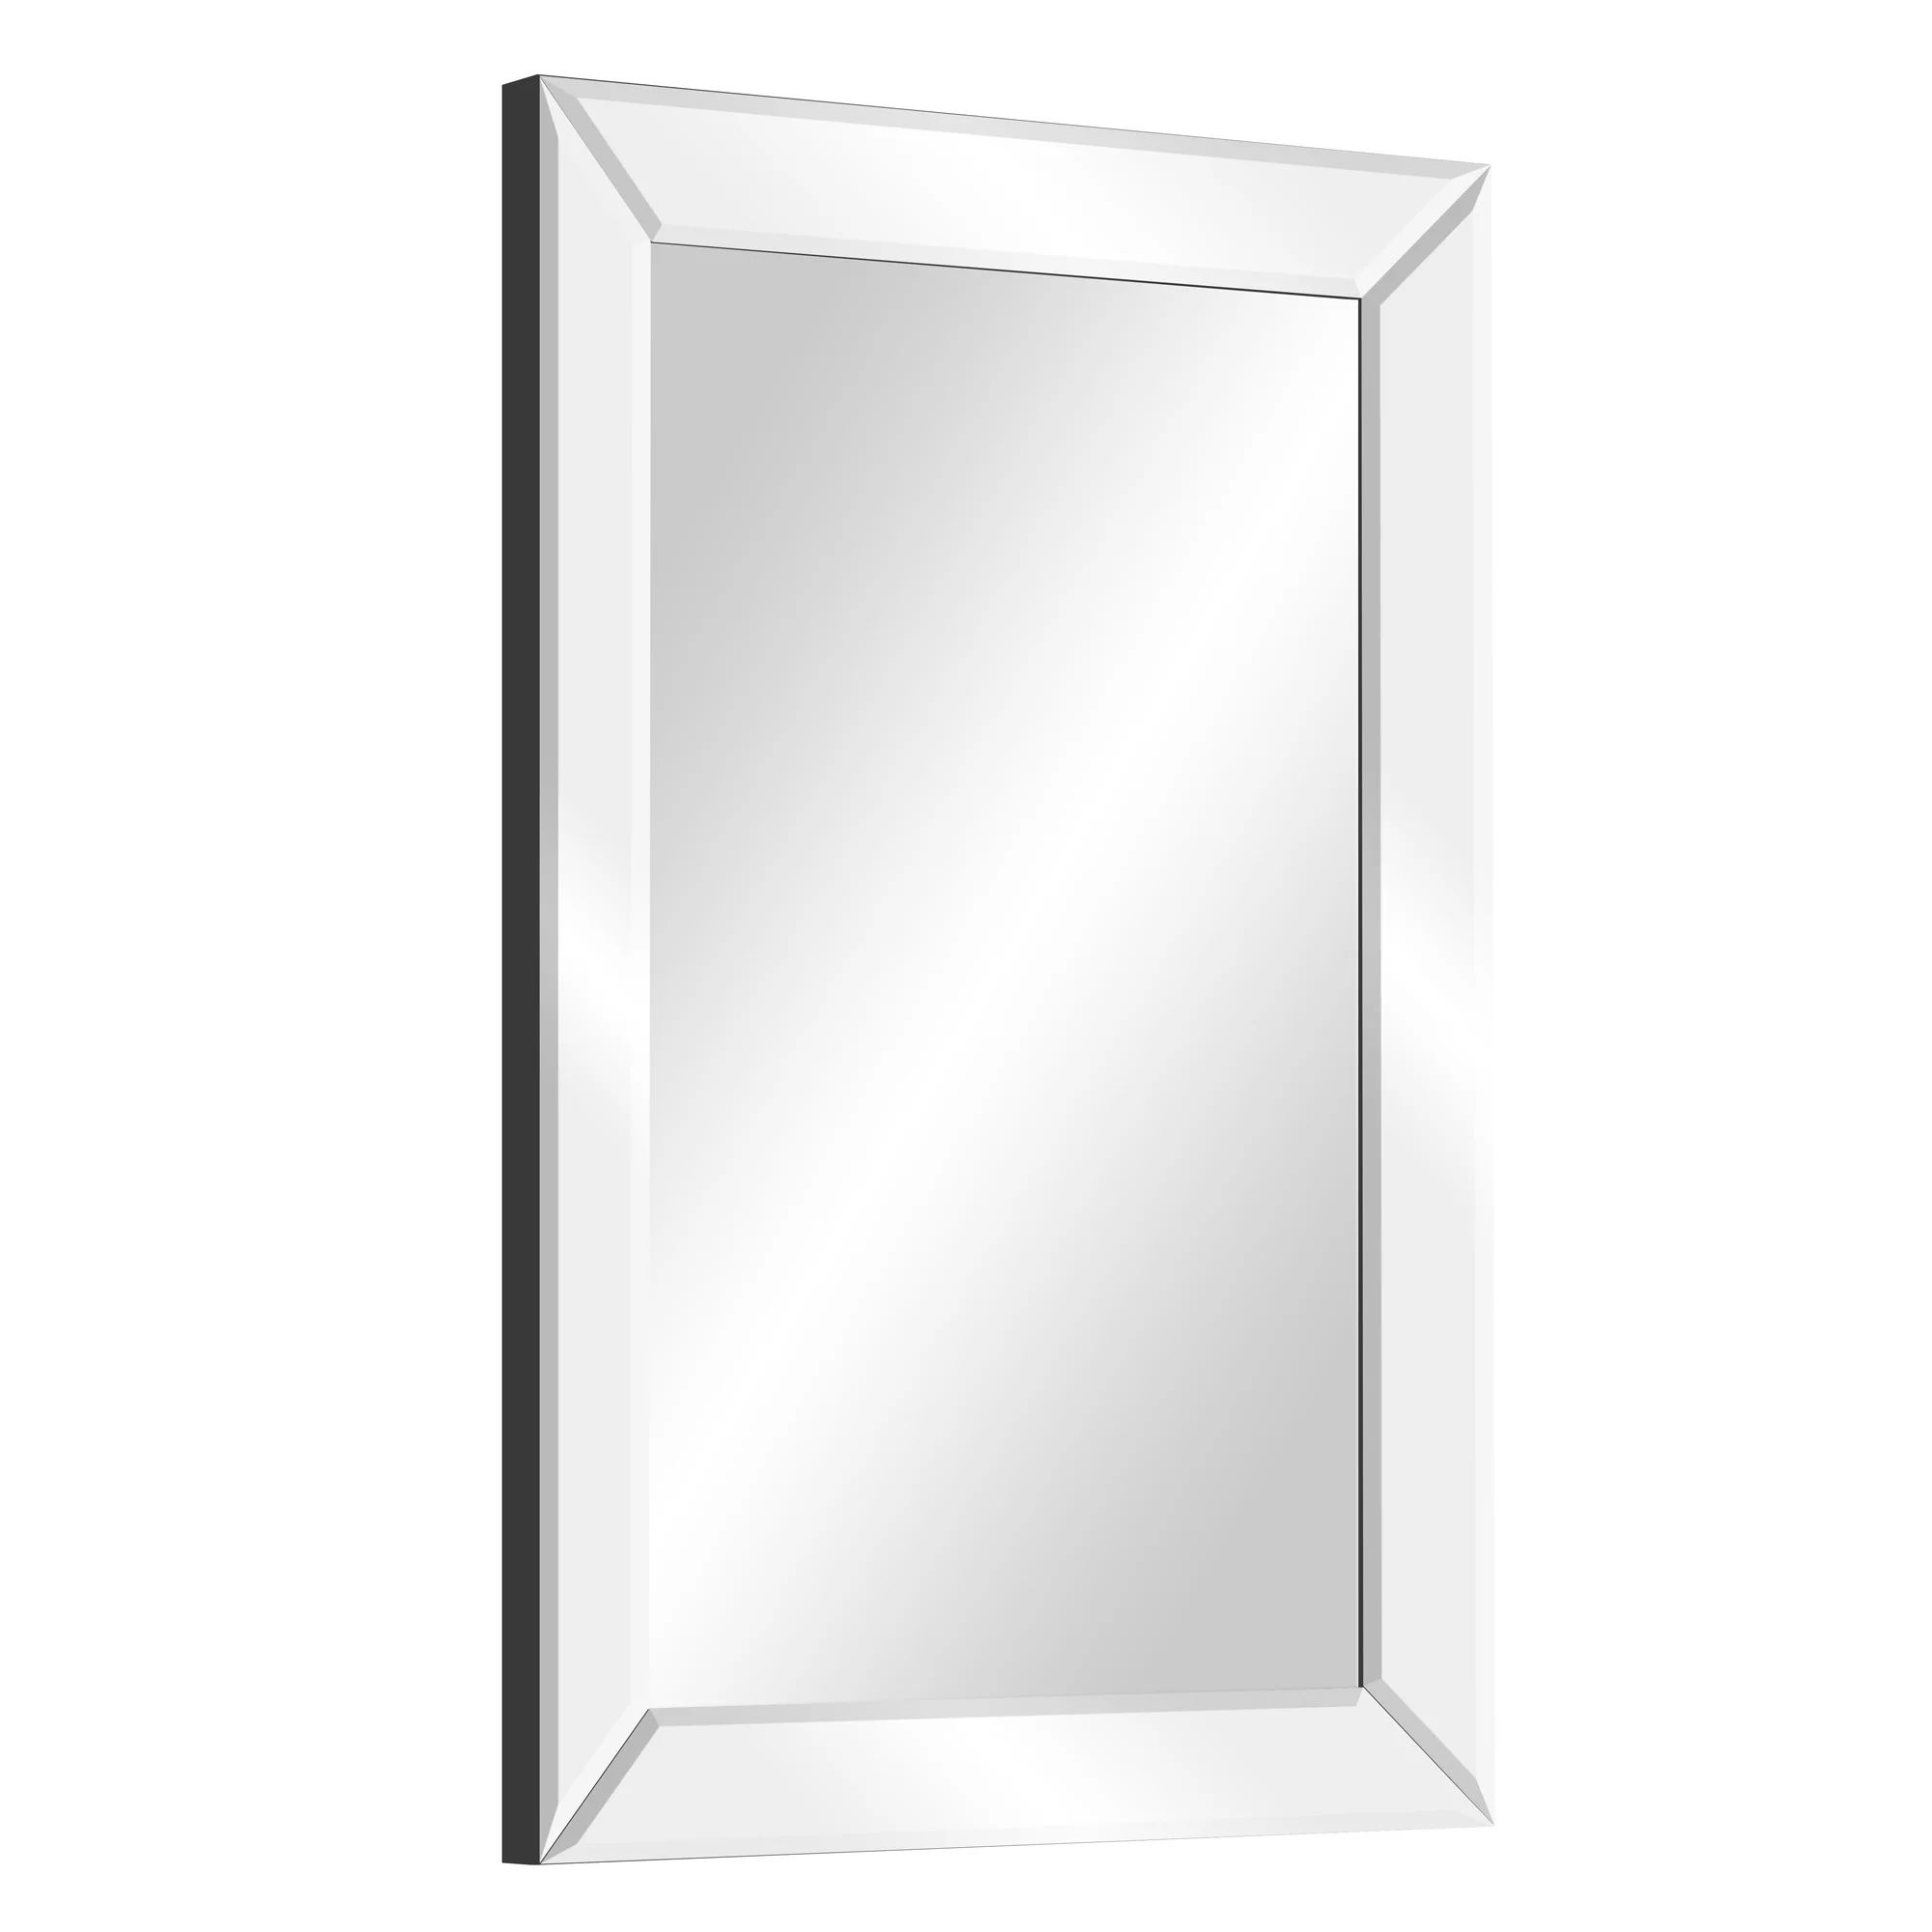 Gallery Solutions 16x24 Beveled Wall Accent Mirror With Mirror Panel Border | Walmart (US)